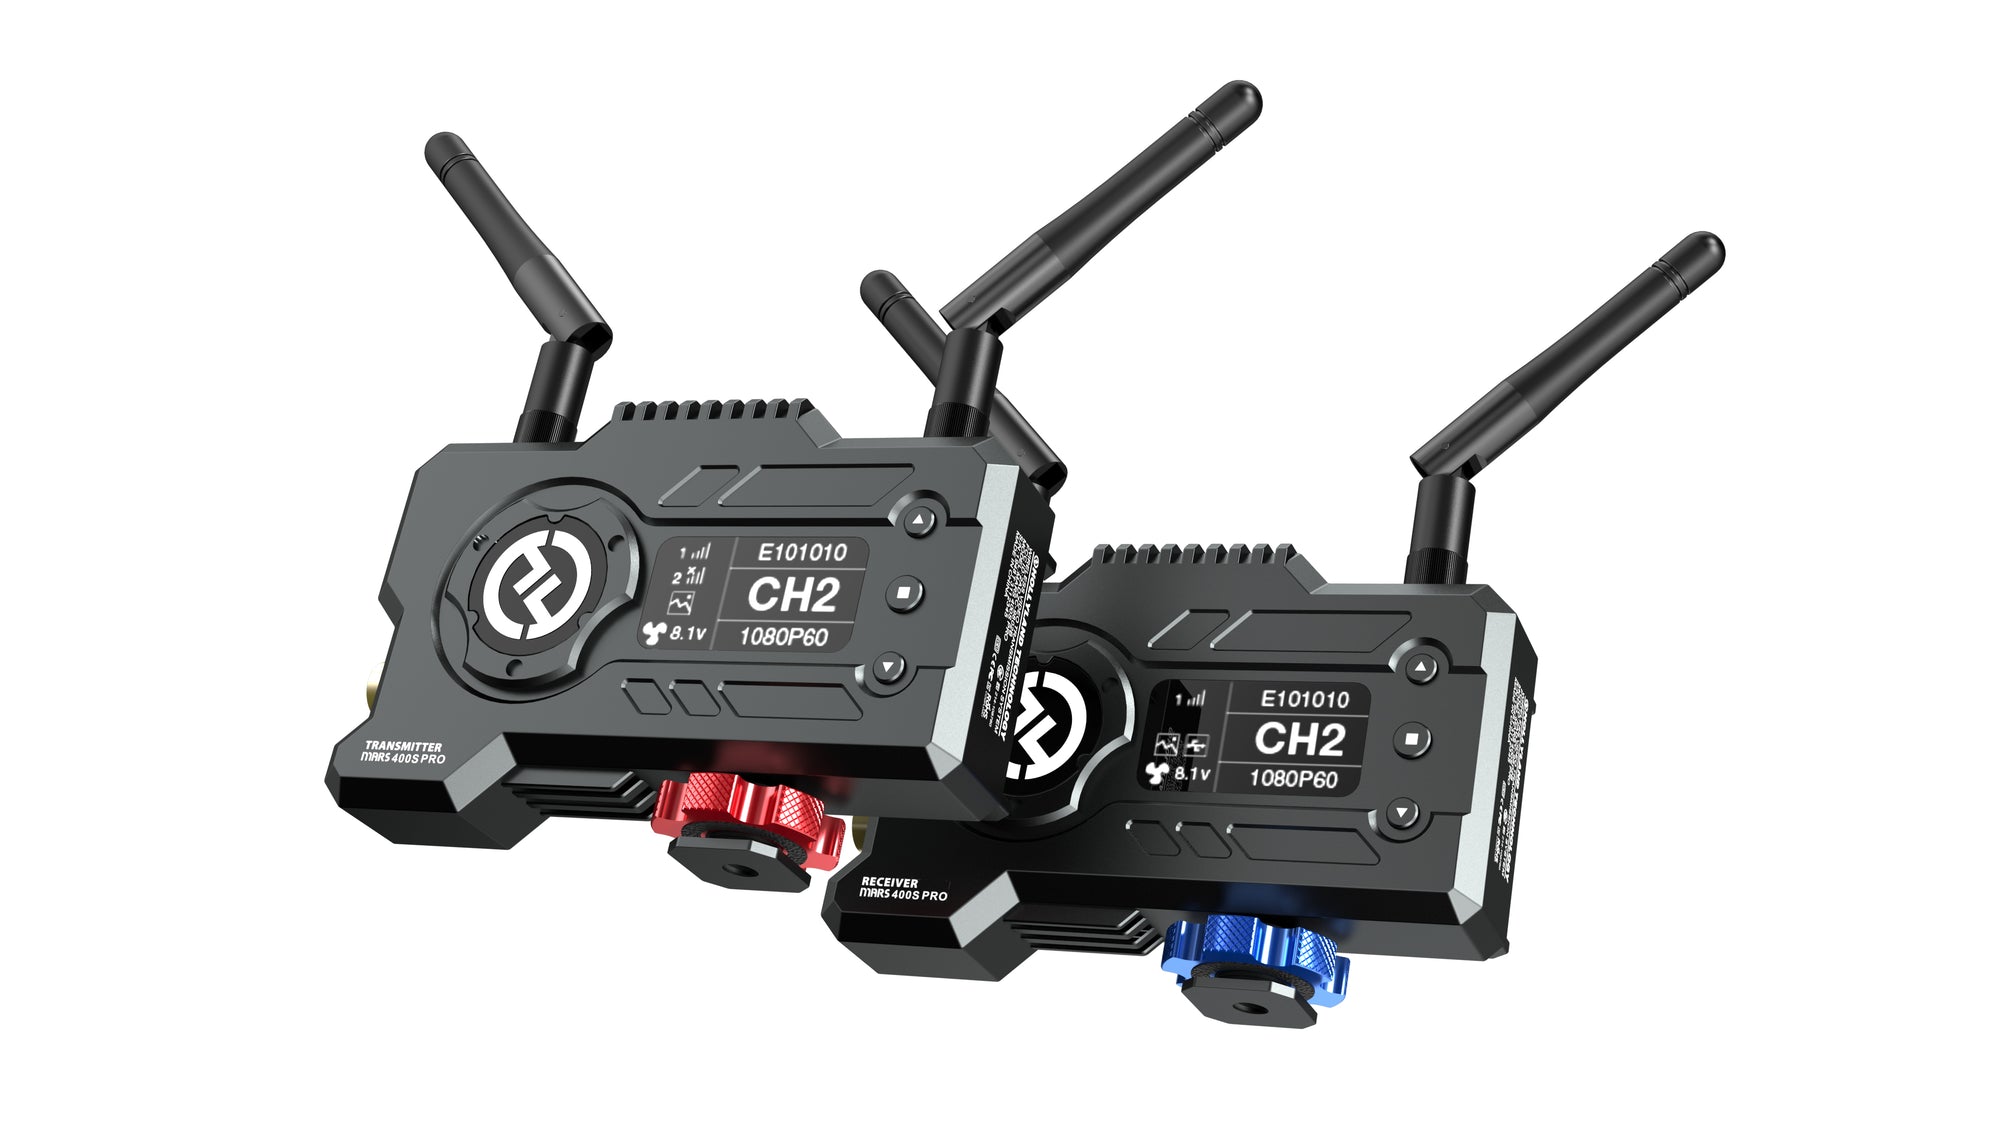 Hollyland Mars400S PRO Dual HDMI Wireless HD Video Transmission System - 305broadcast